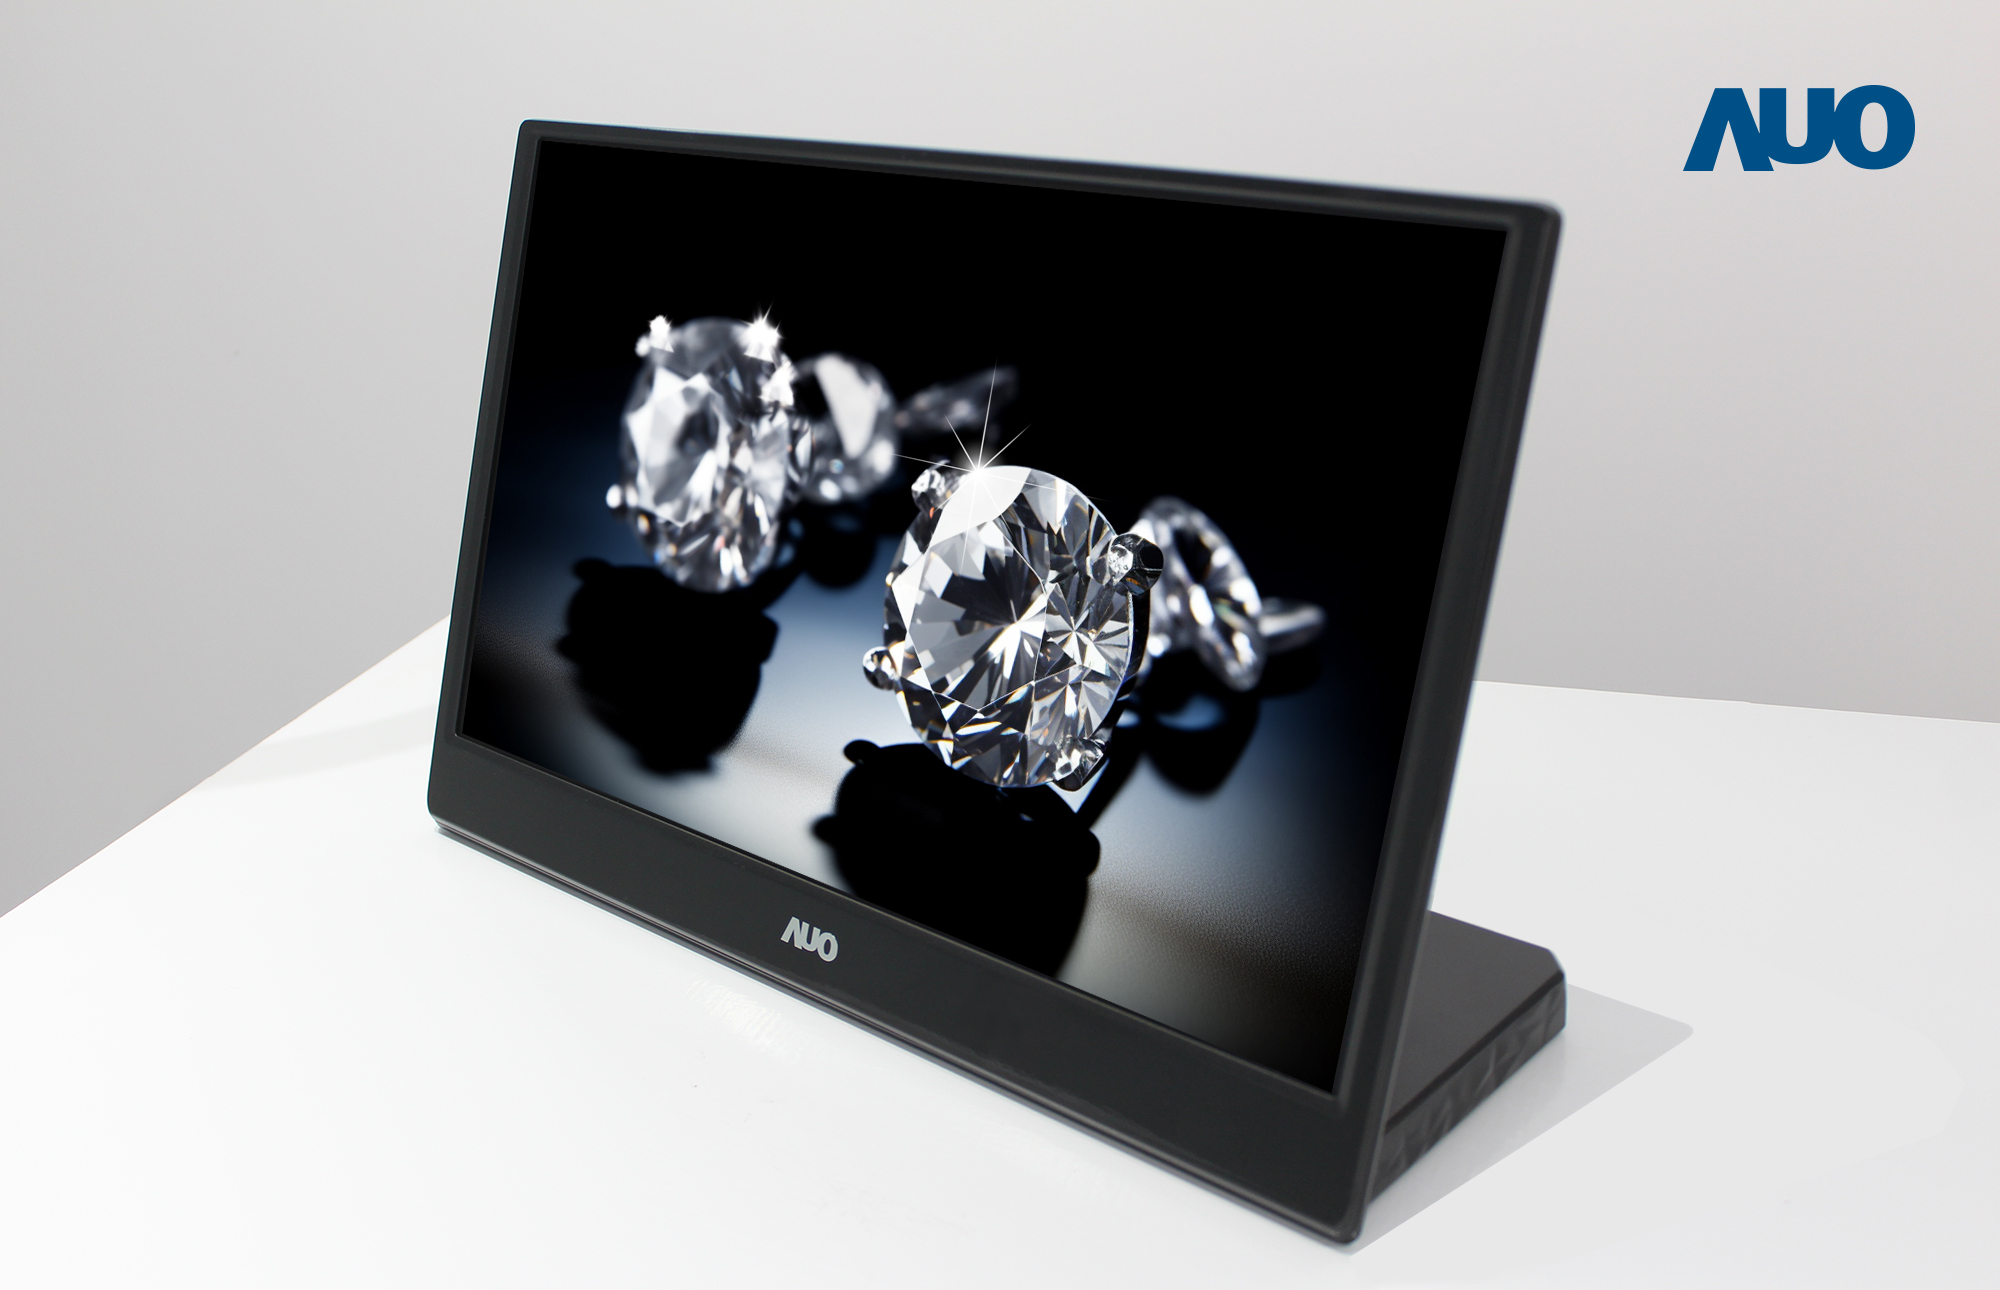 AUO launches the world’s first A.R.T.® display technology integrated Micro LED display. Its anti-glare, reflectionless, and high scattering features, guarantees the displaying contents can be seen perfectly and clearly in brightly-lit environments, where unique textures such as diamonds or other jewels can be reproduced in their full brilliance